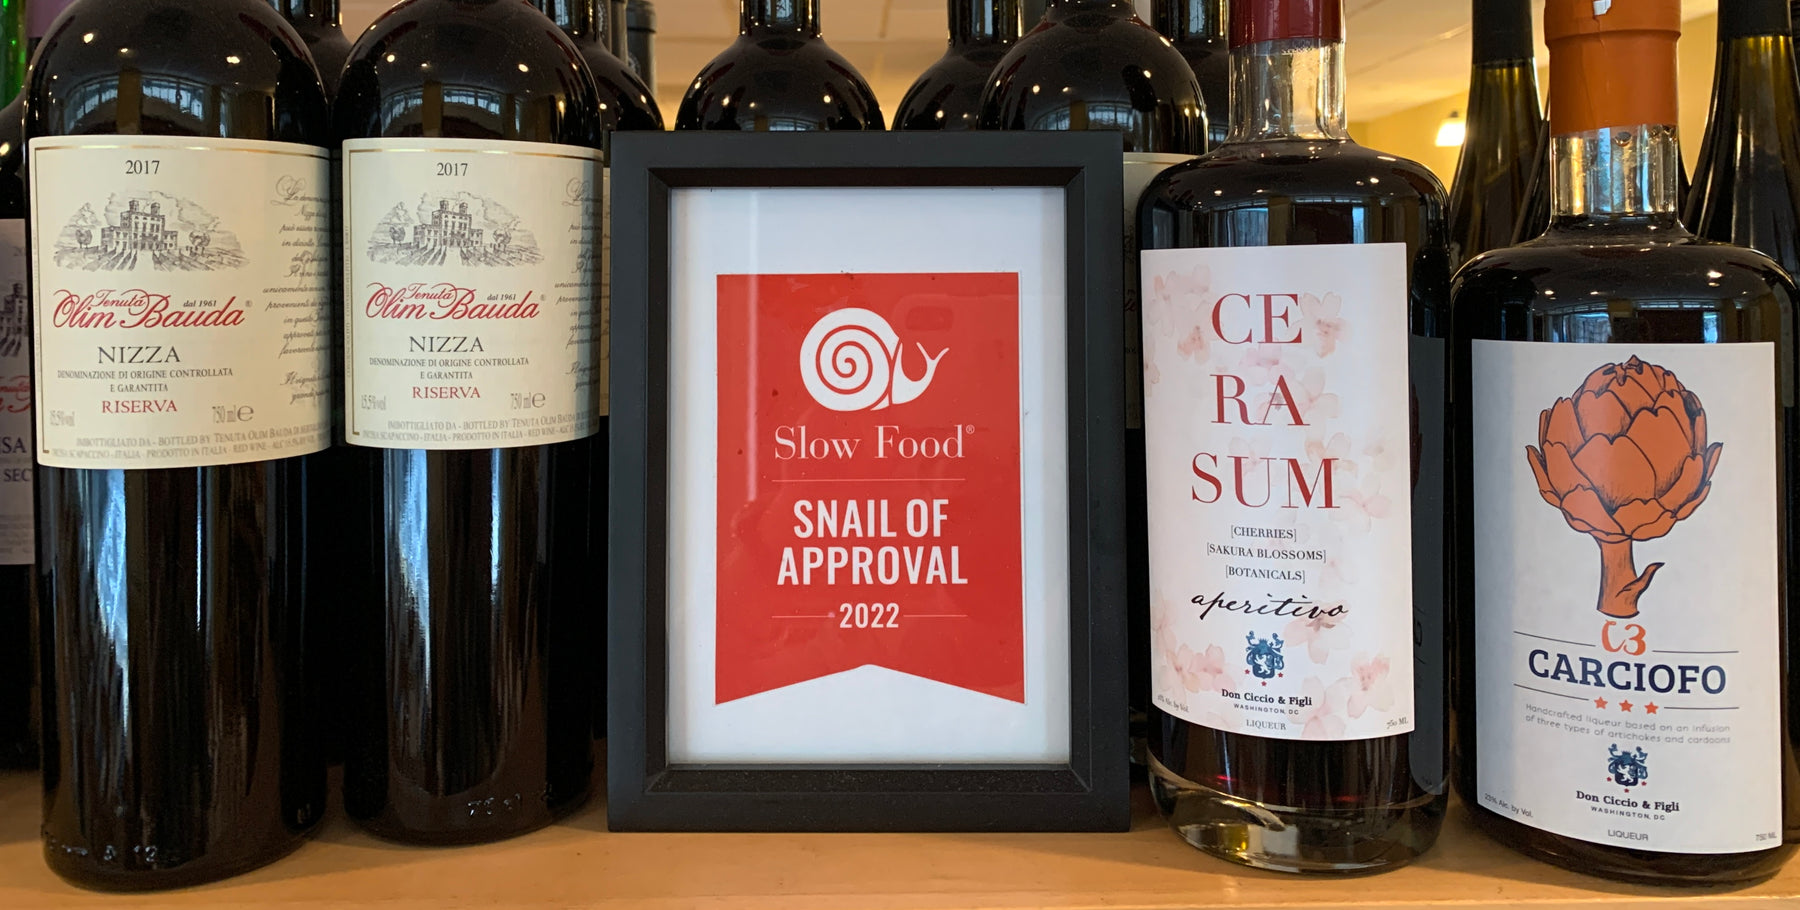 Weygandt Wines Awarded Slow Food DC's Snail of Approval